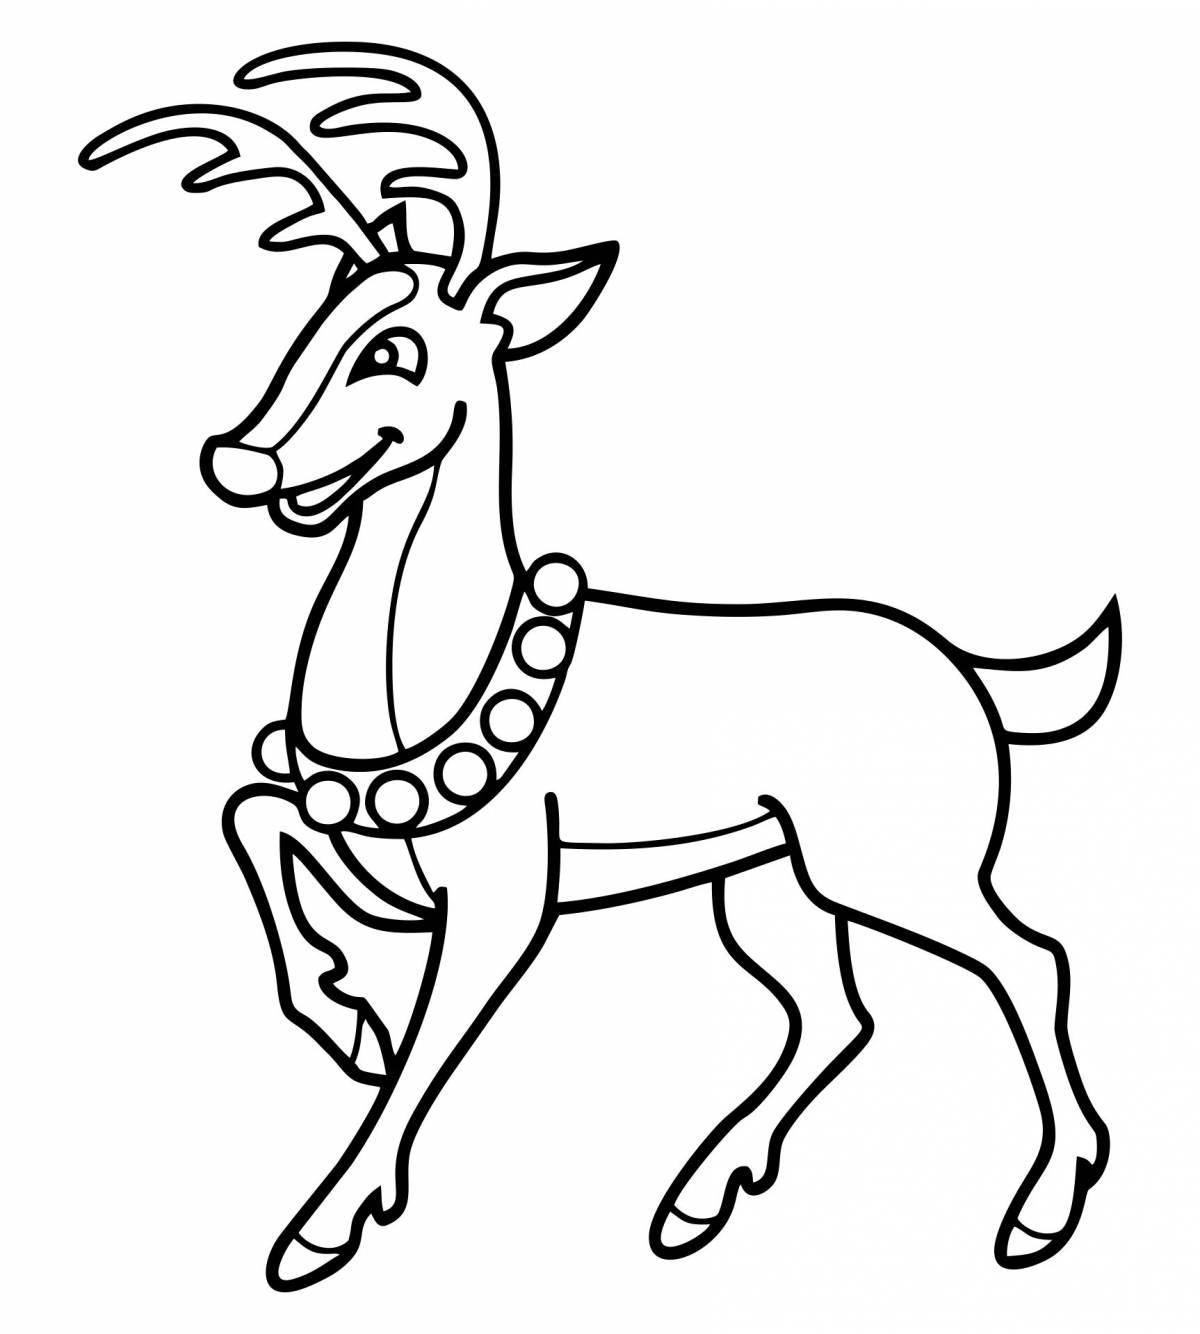 Colorful Christmas reindeer coloring book for kids